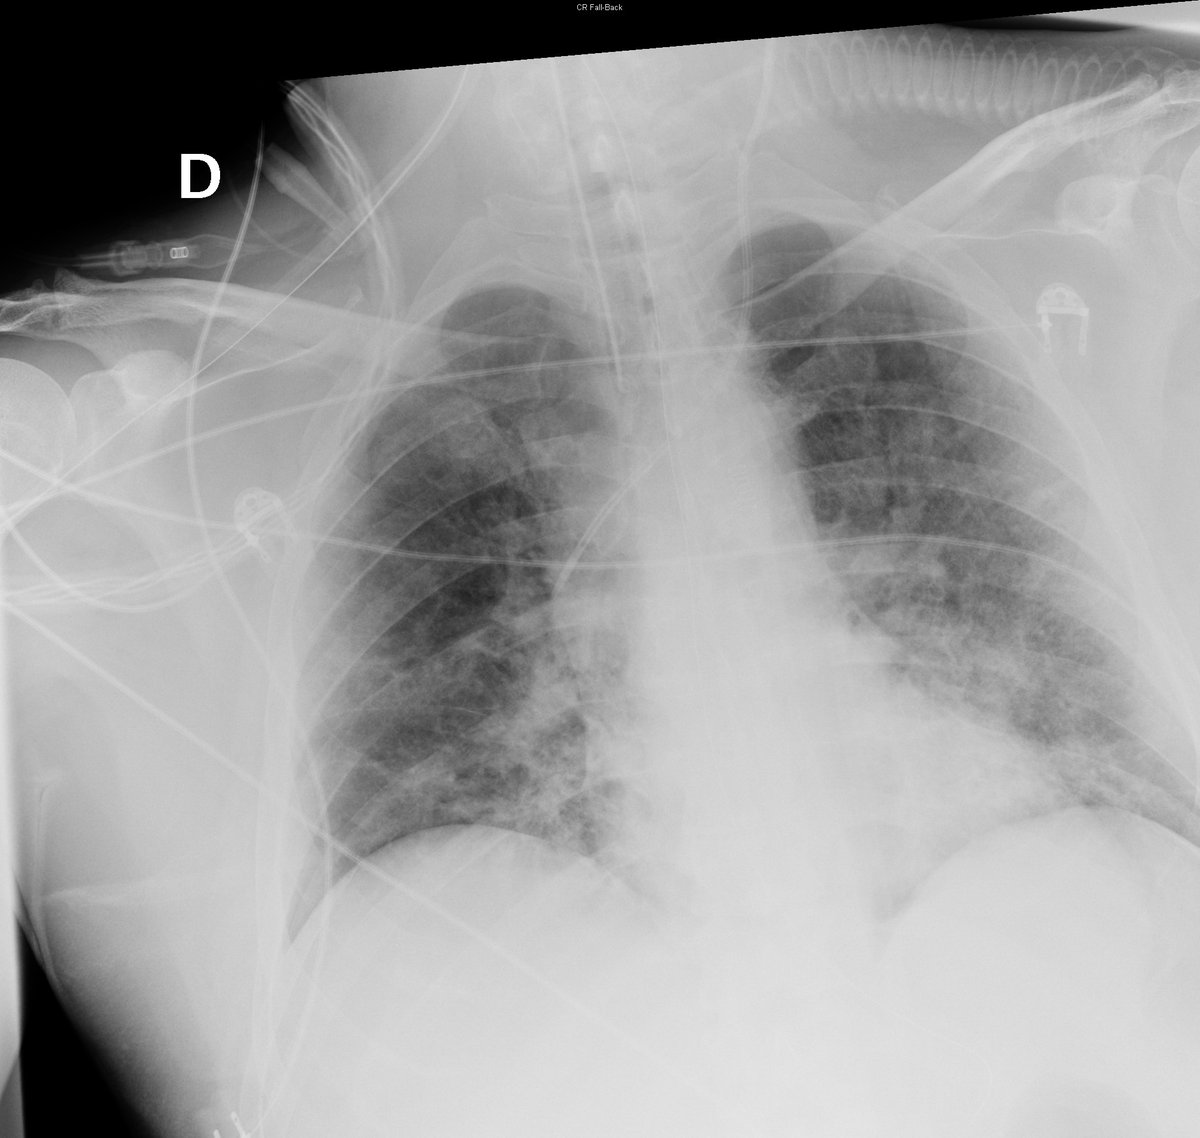 Case 47. 54yo male. Cough and fever. Day 1, 5 (acute respiratory failure), 7 and 9. Small peripheral opacities with progresion toward extensive bilateral consolidation.